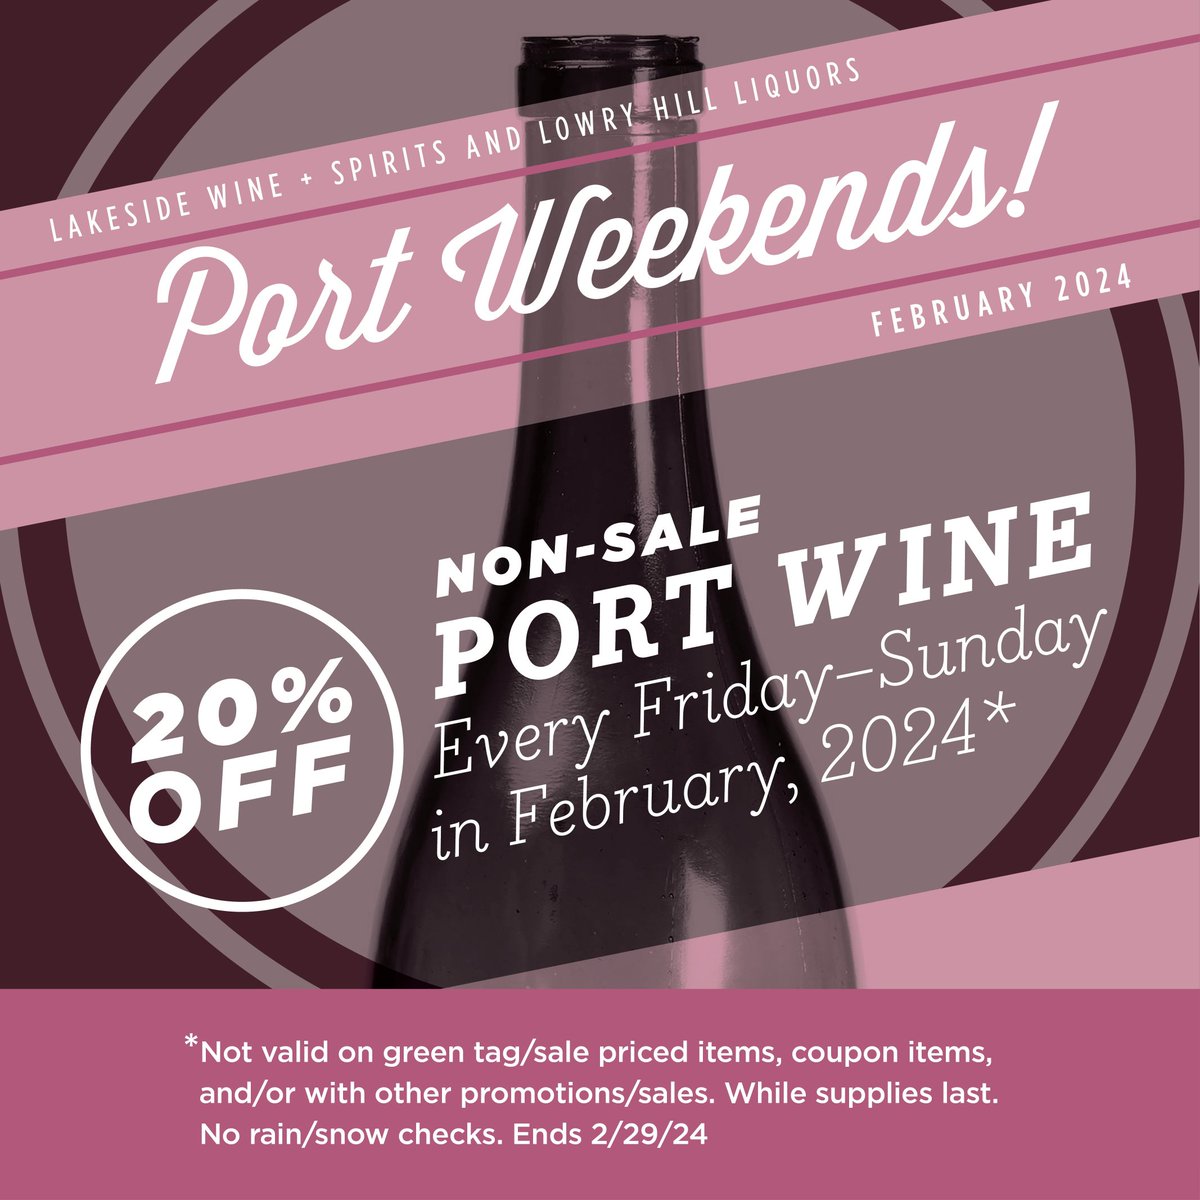 If you've never tried port wine, this is the time of year to do it! Sweet and typically served with dessert, it is perfect for Valentine's Day or a winter evening. #portwine #winesale #winedeals